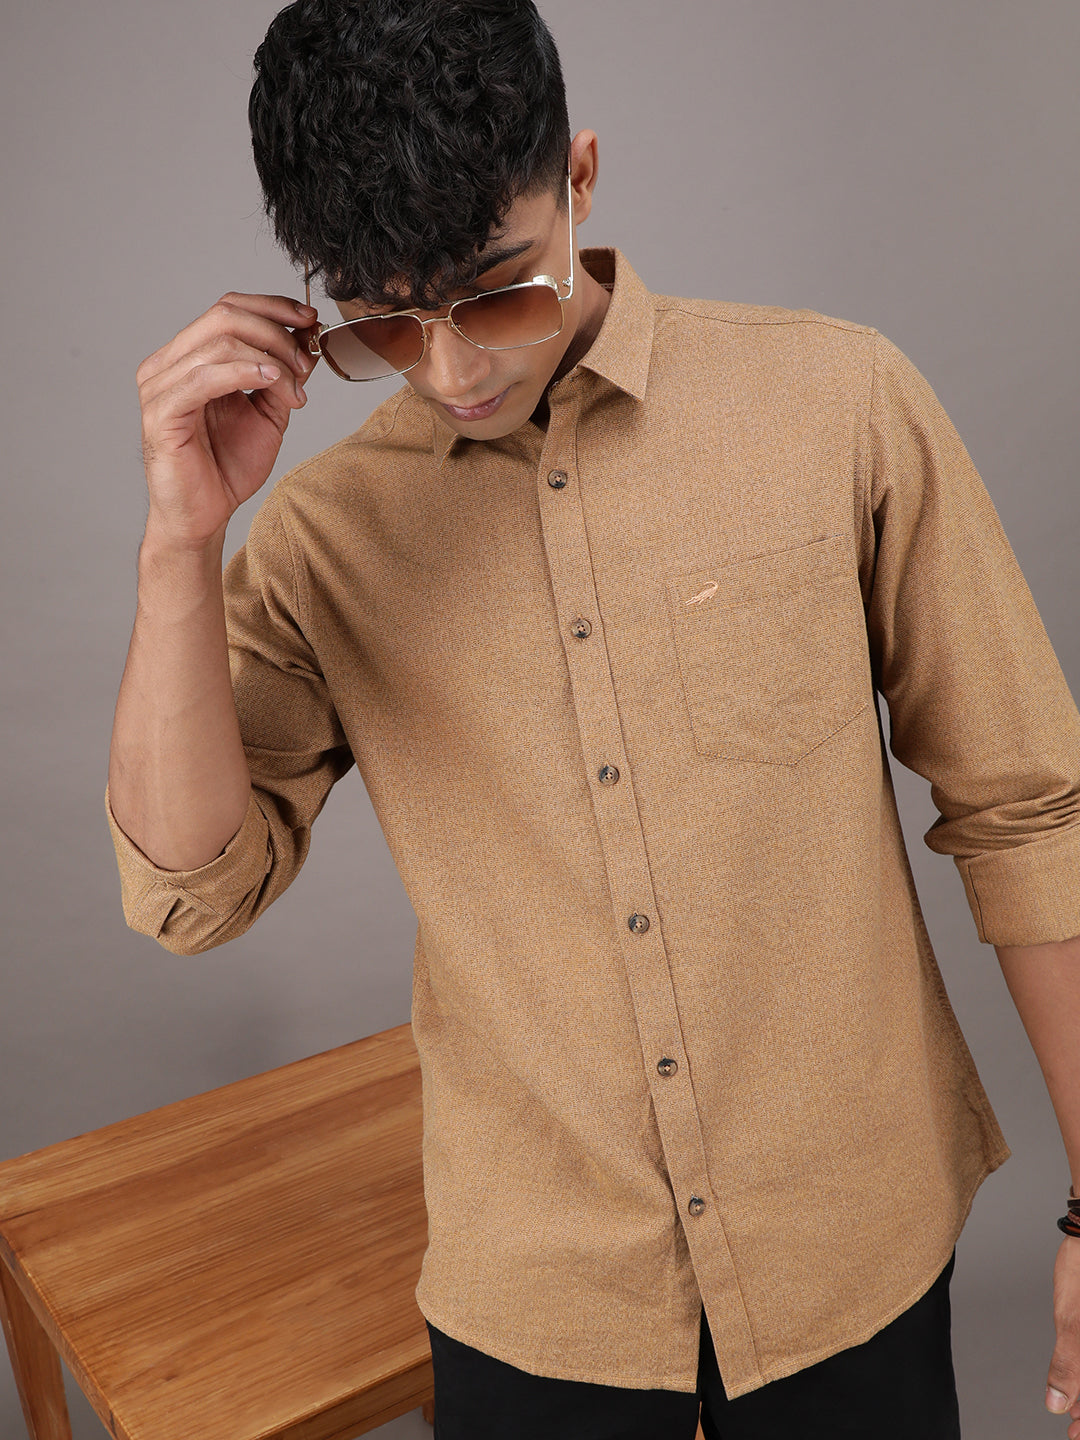 Grindle Textured Shirt